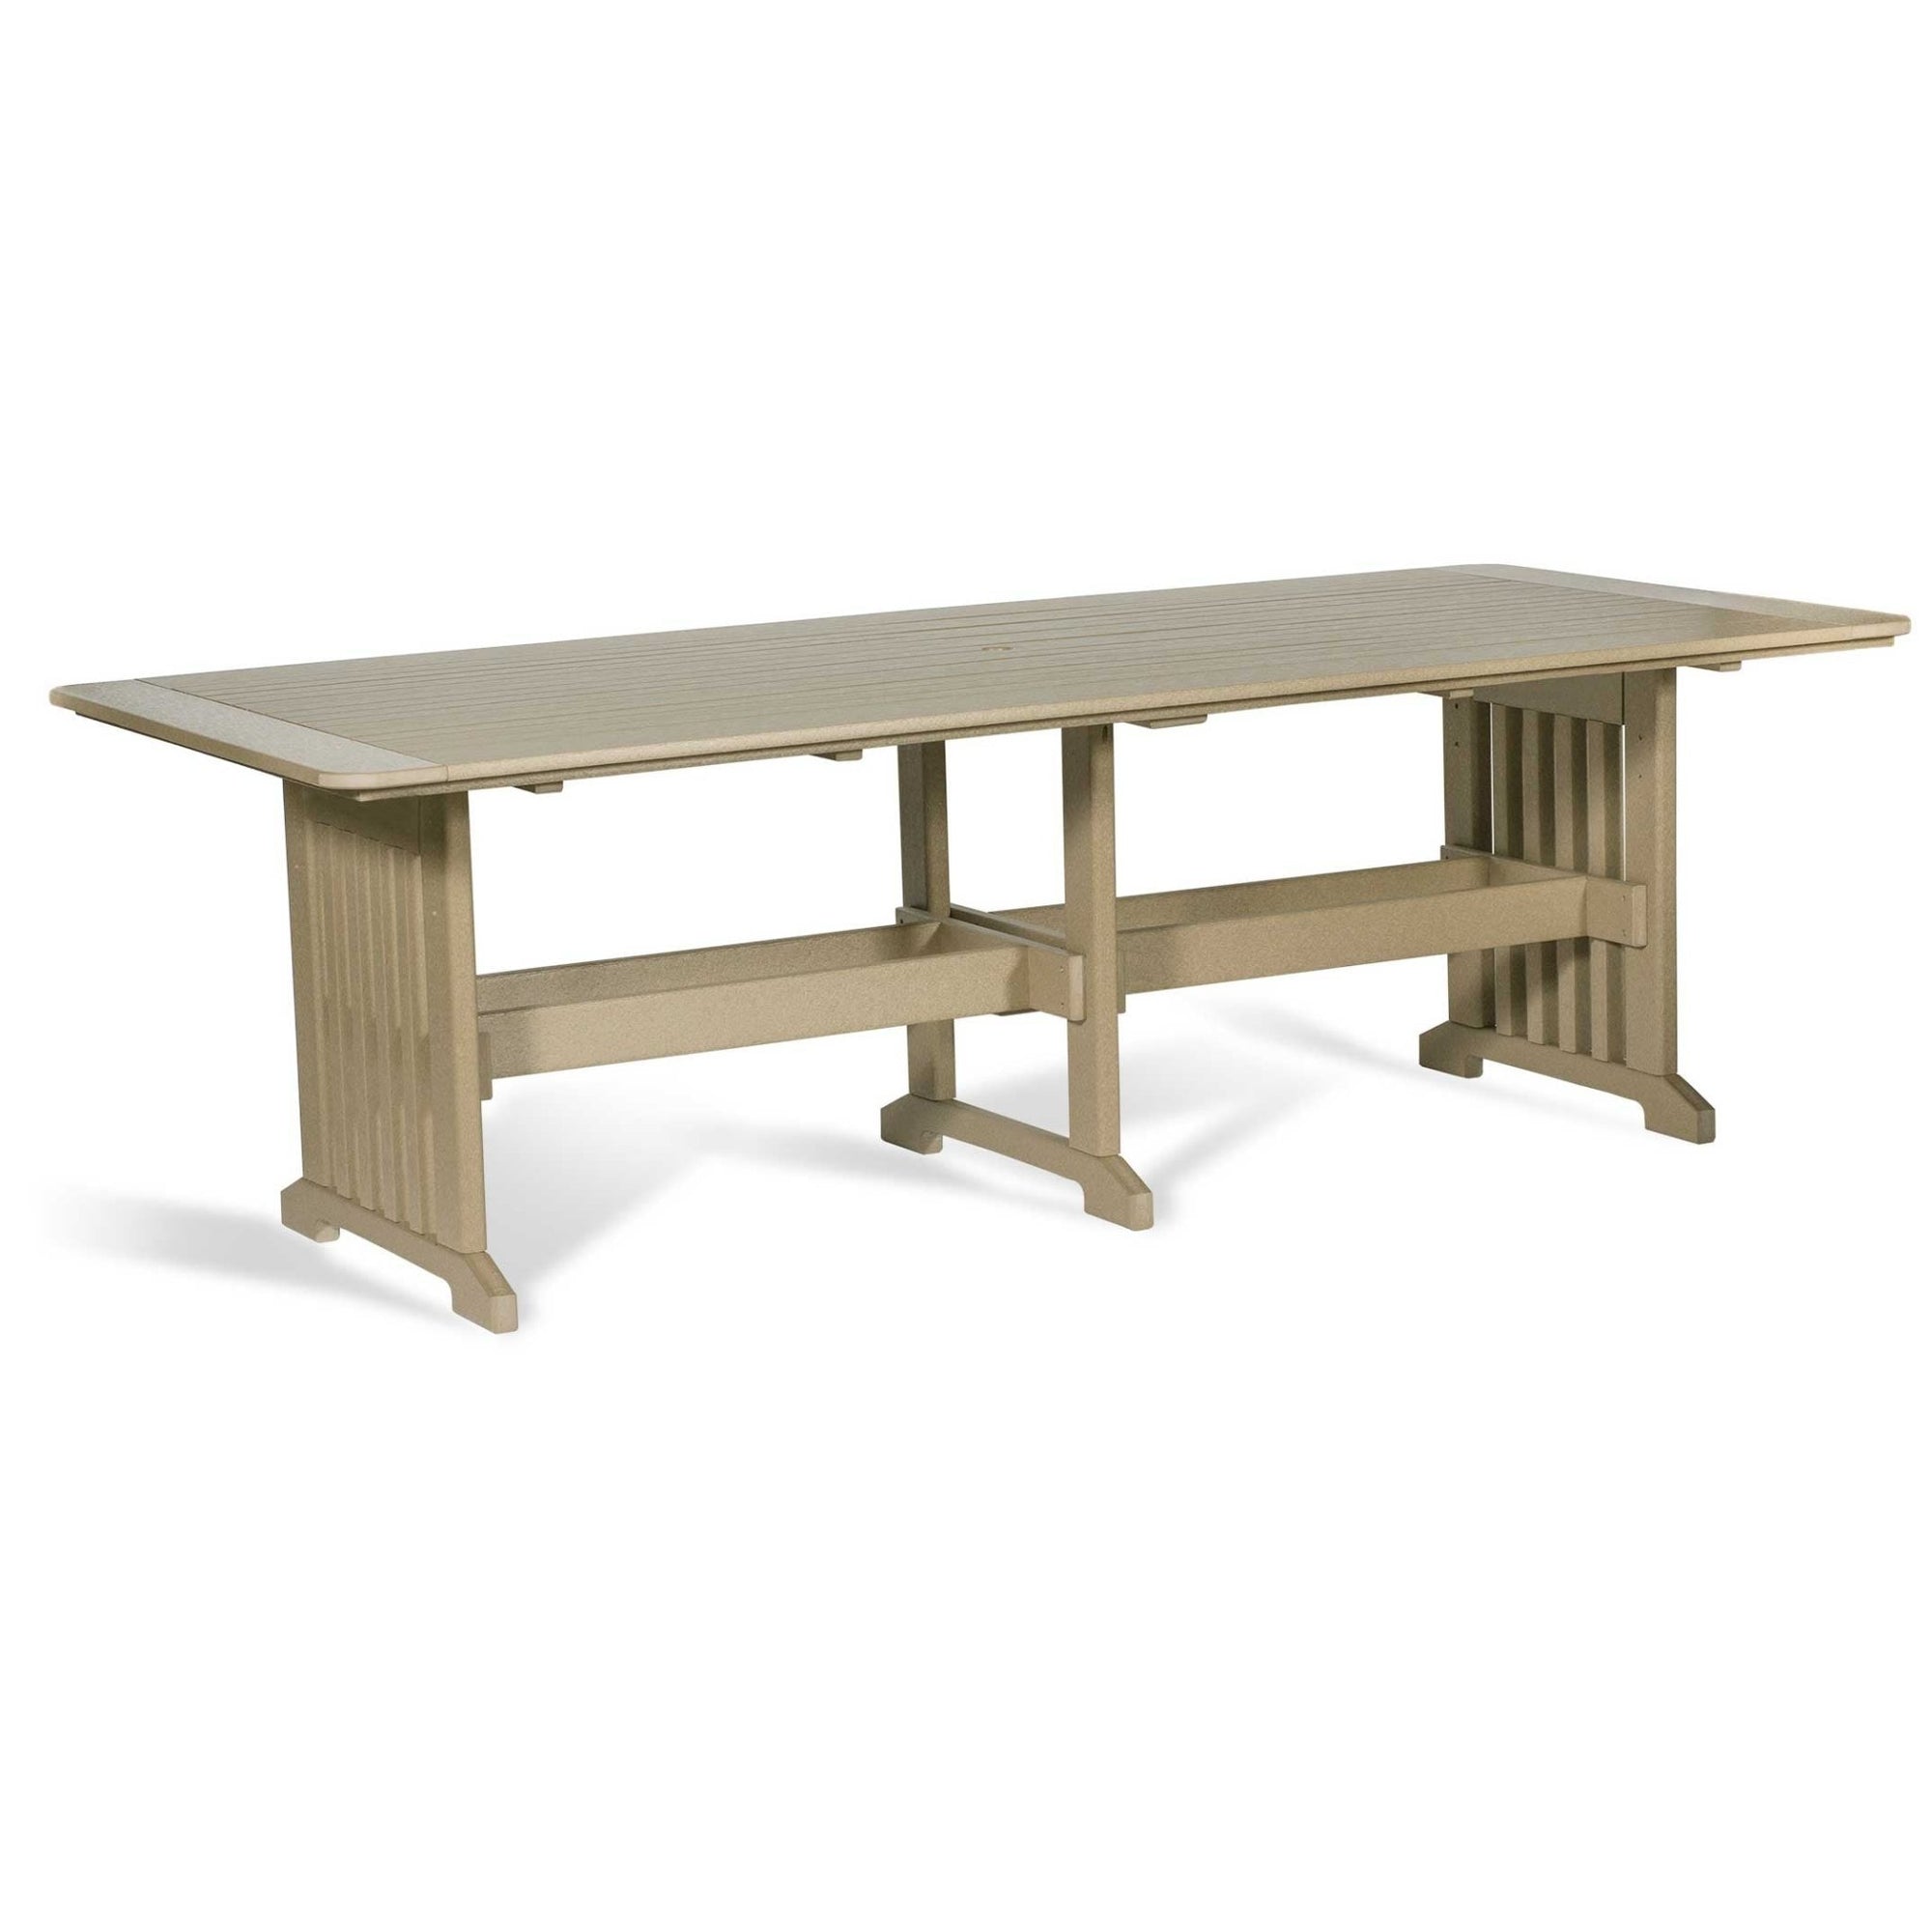 English Garden Amish 96" Poly Dining Table Leisure Lawns